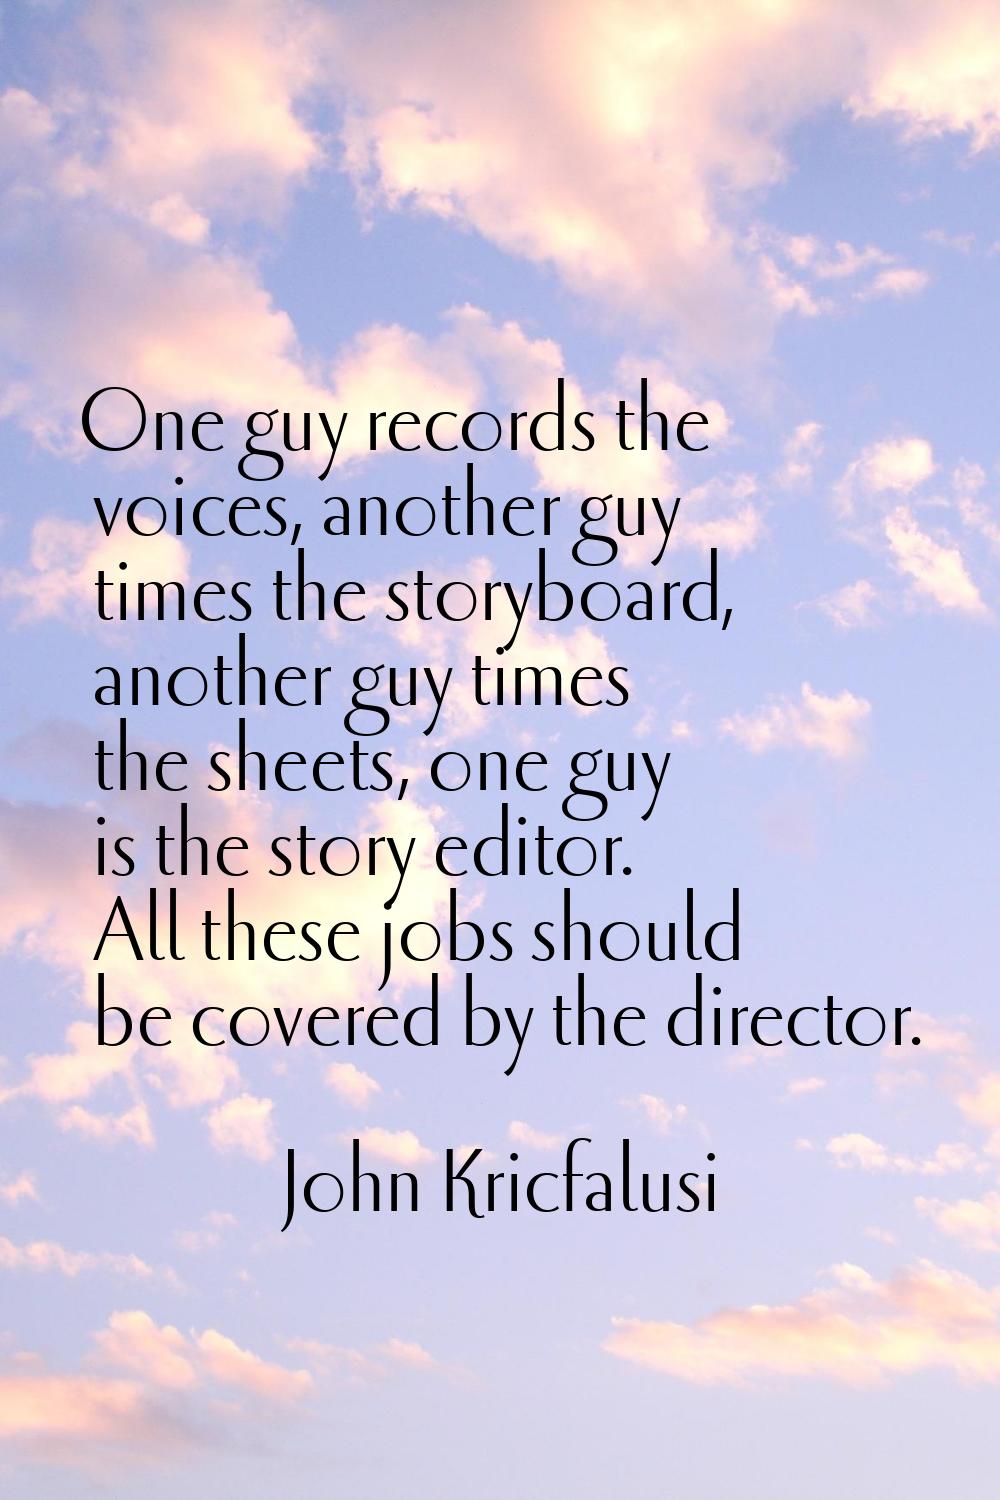 One guy records the voices, another guy times the storyboard, another guy times the sheets, one guy